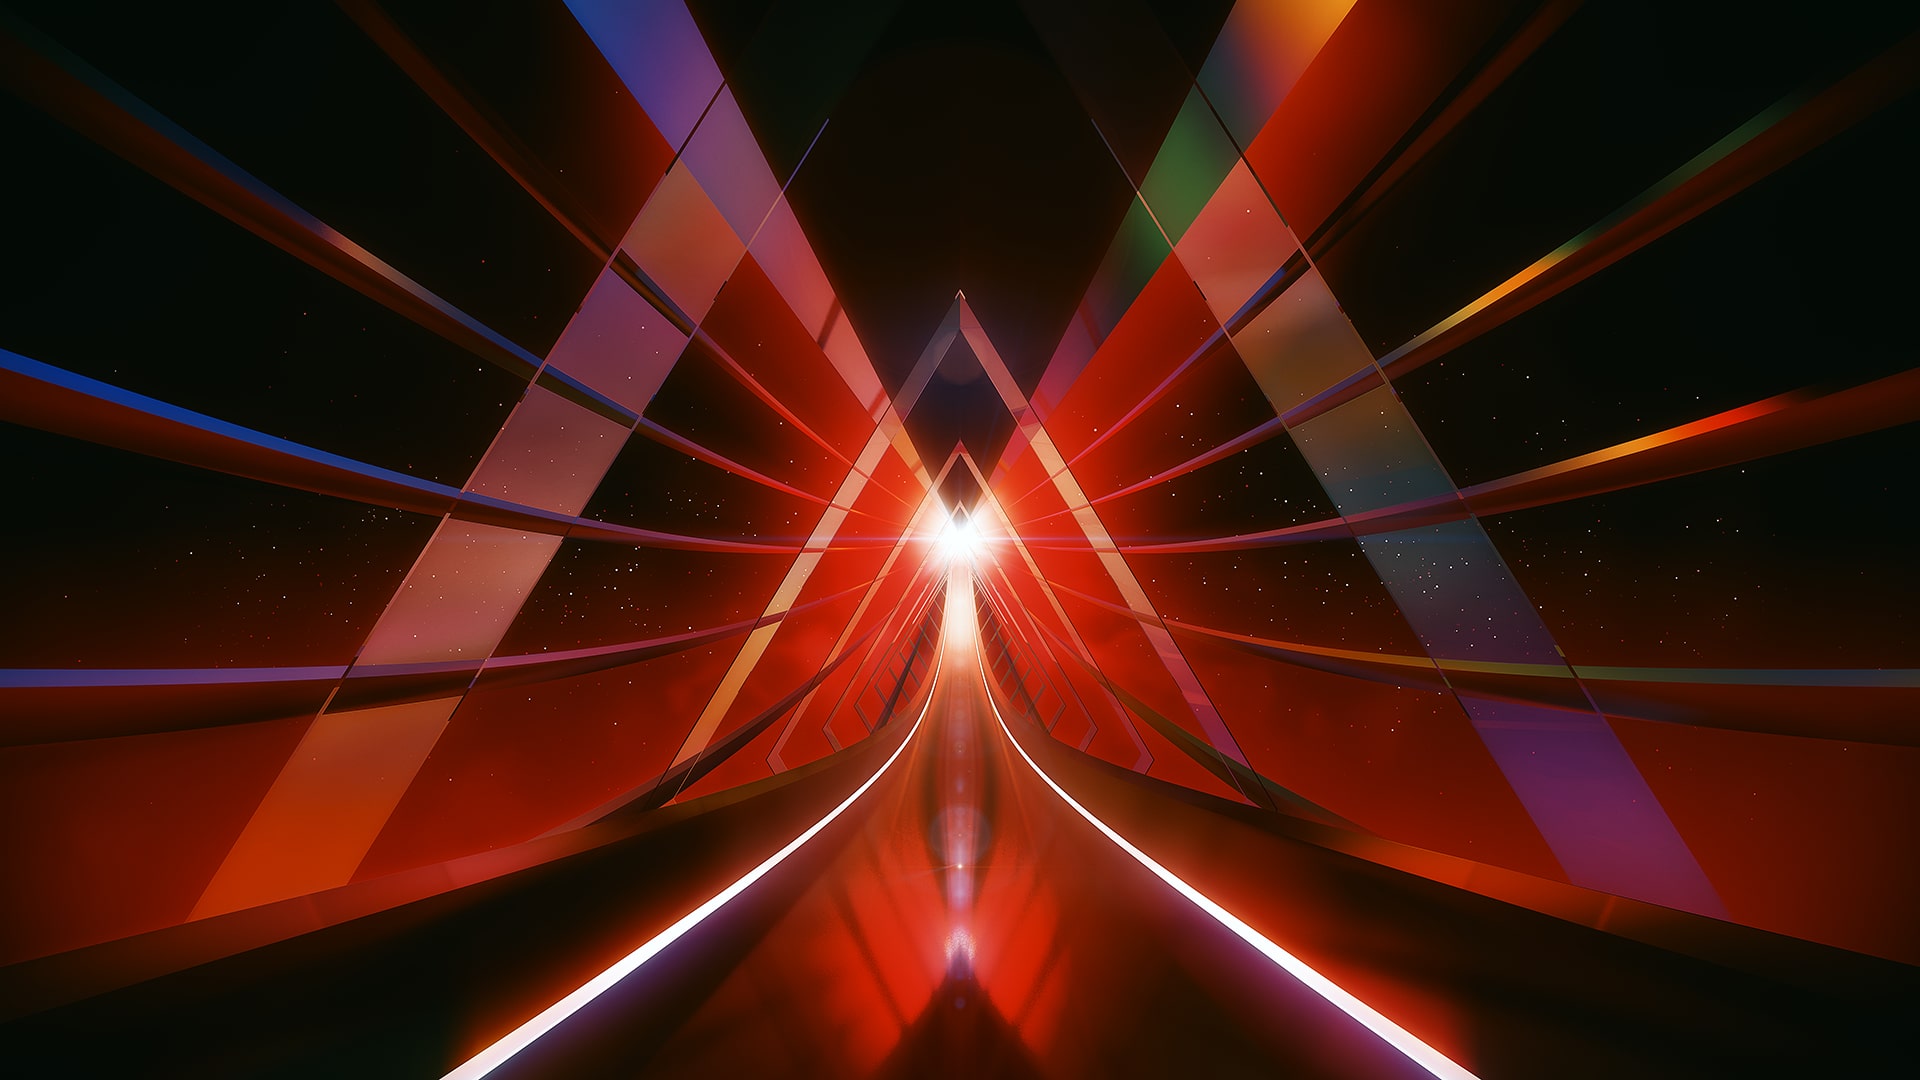 Thumper (Game)